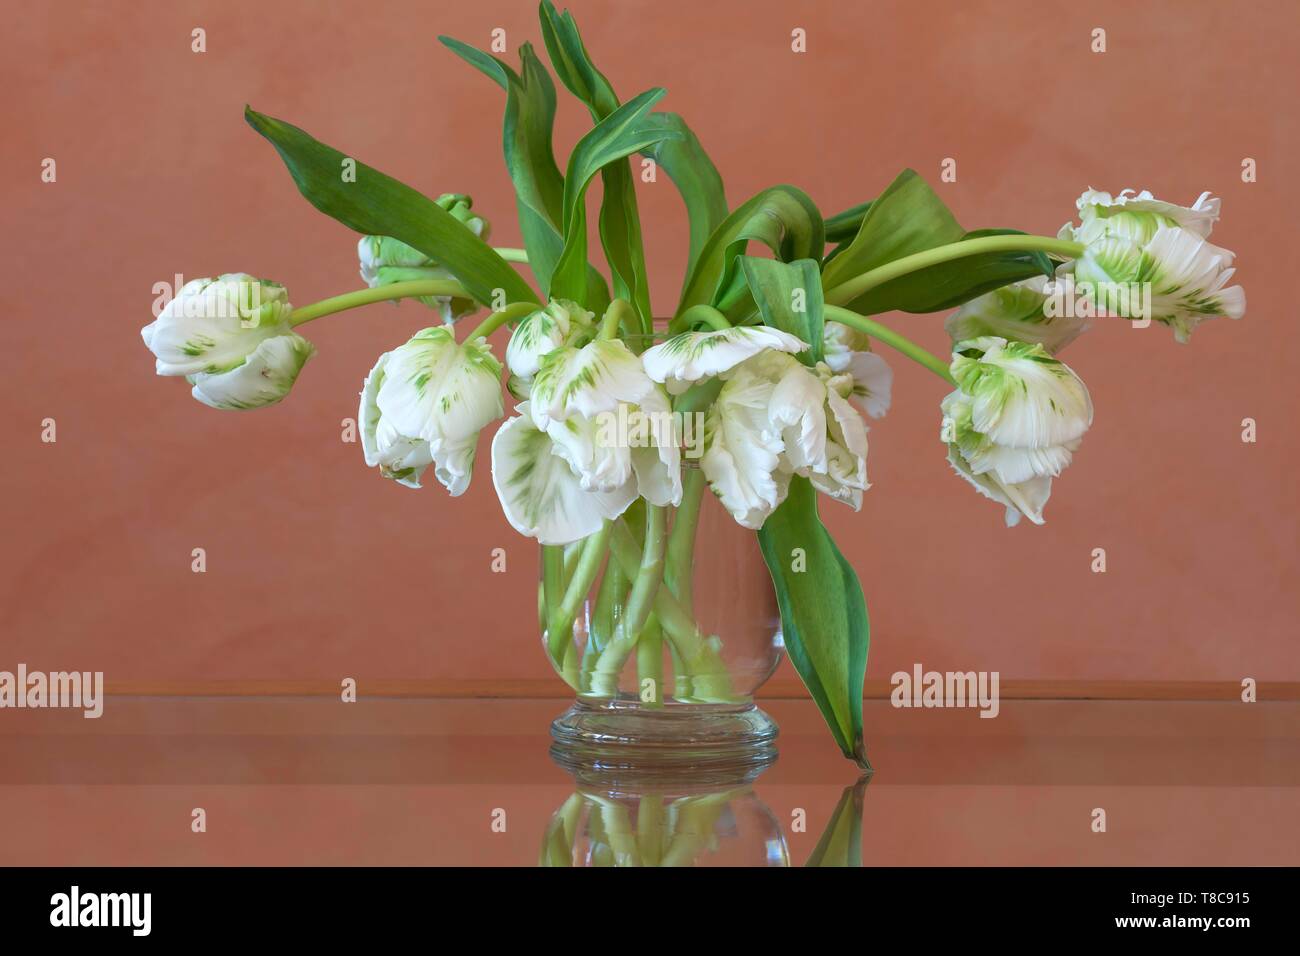 White Parrot Tulips (Tulipa gesneriana Parrot Group), in a glass vase, Germany Stock Photo